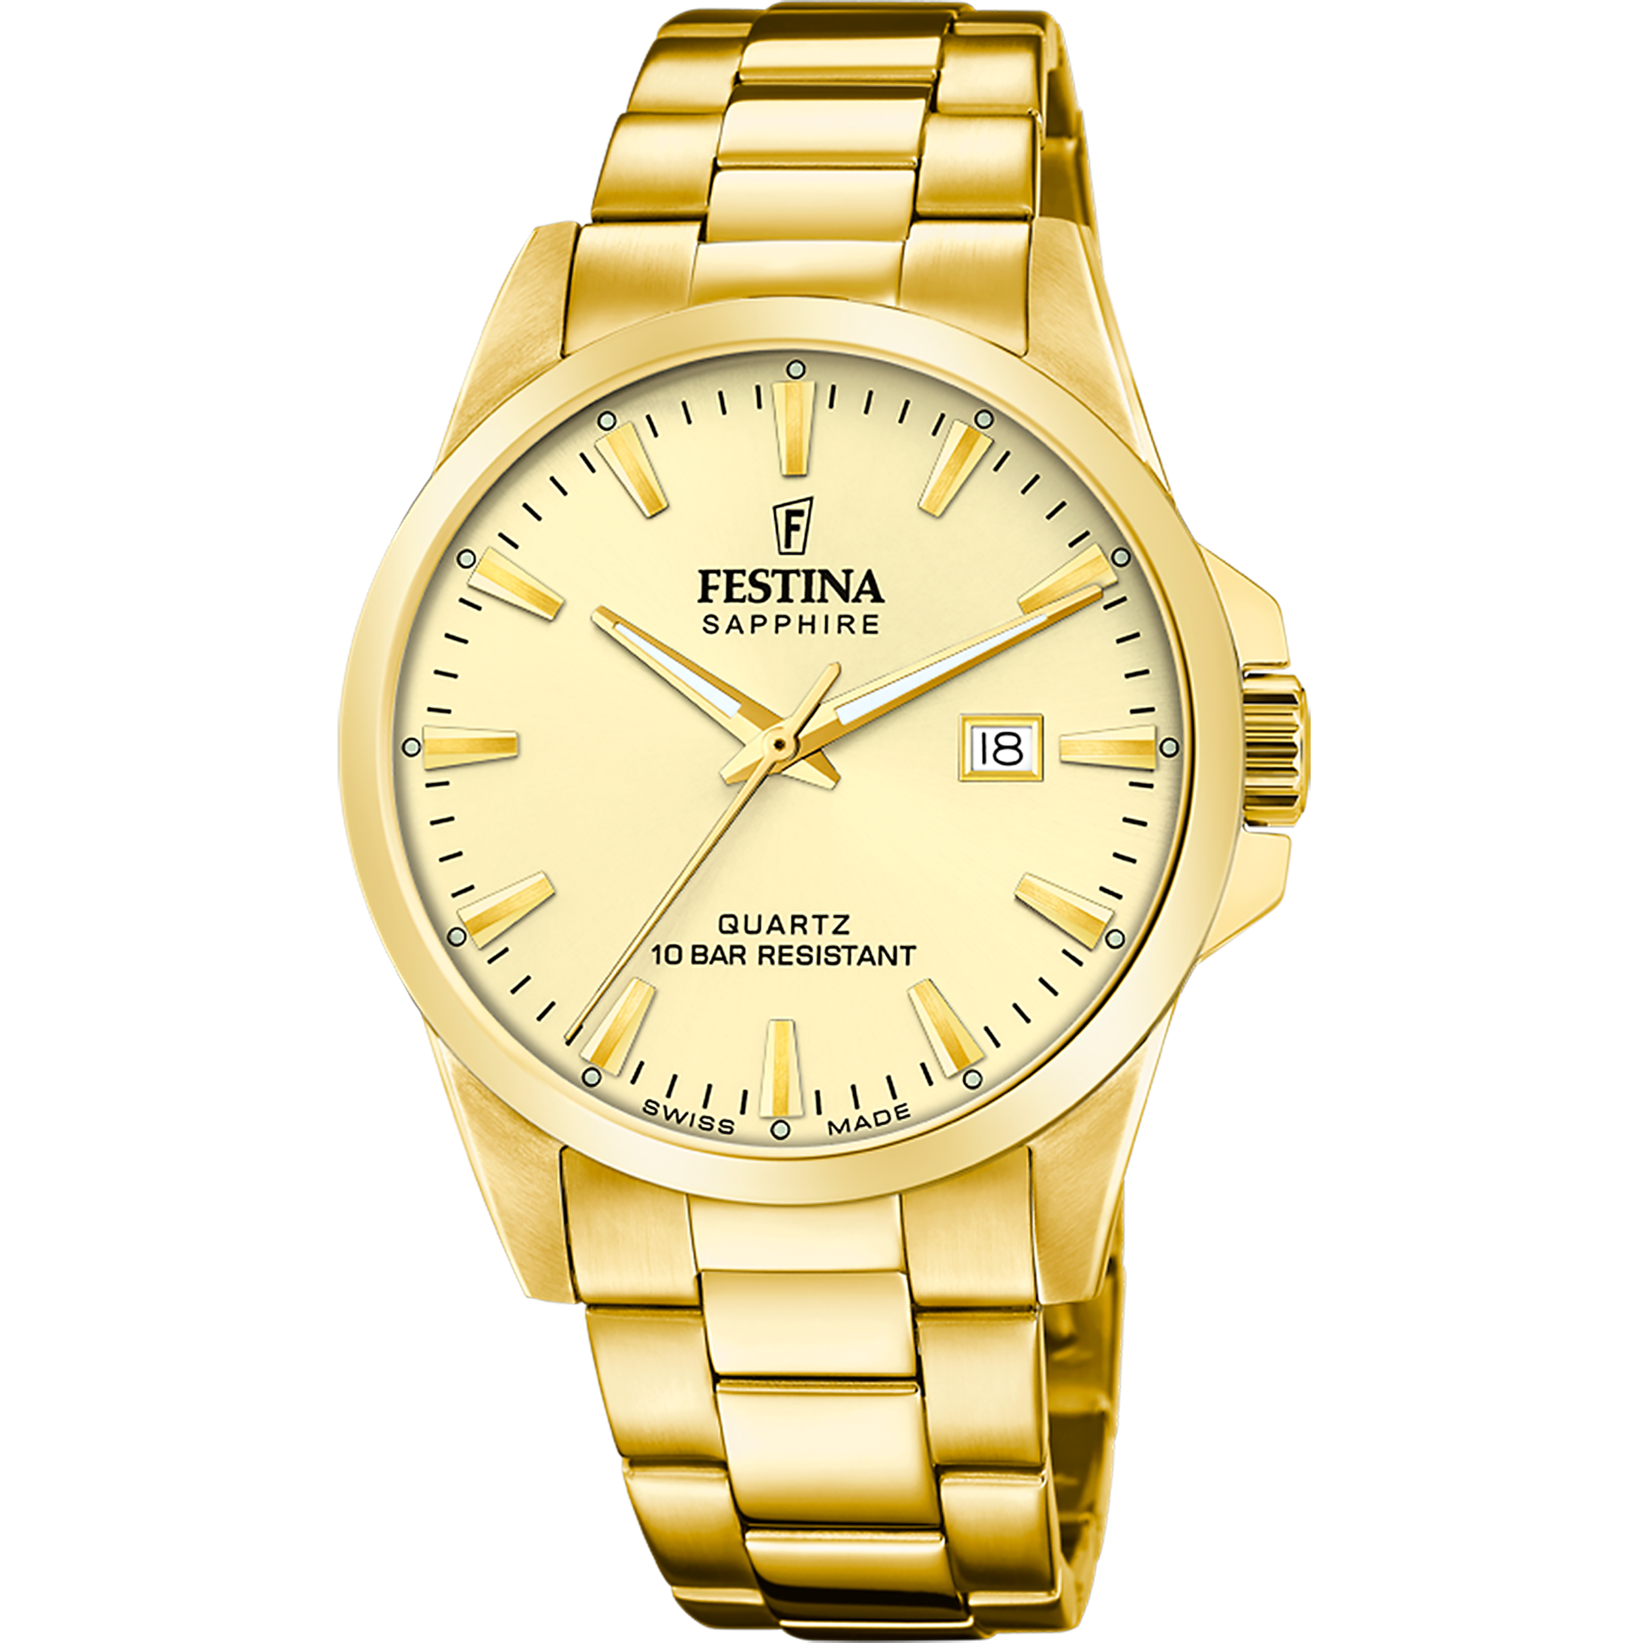 Festina Swiss Made F20044-4 - Analog - Strap Material Stainless Steel I Festina Watches USA